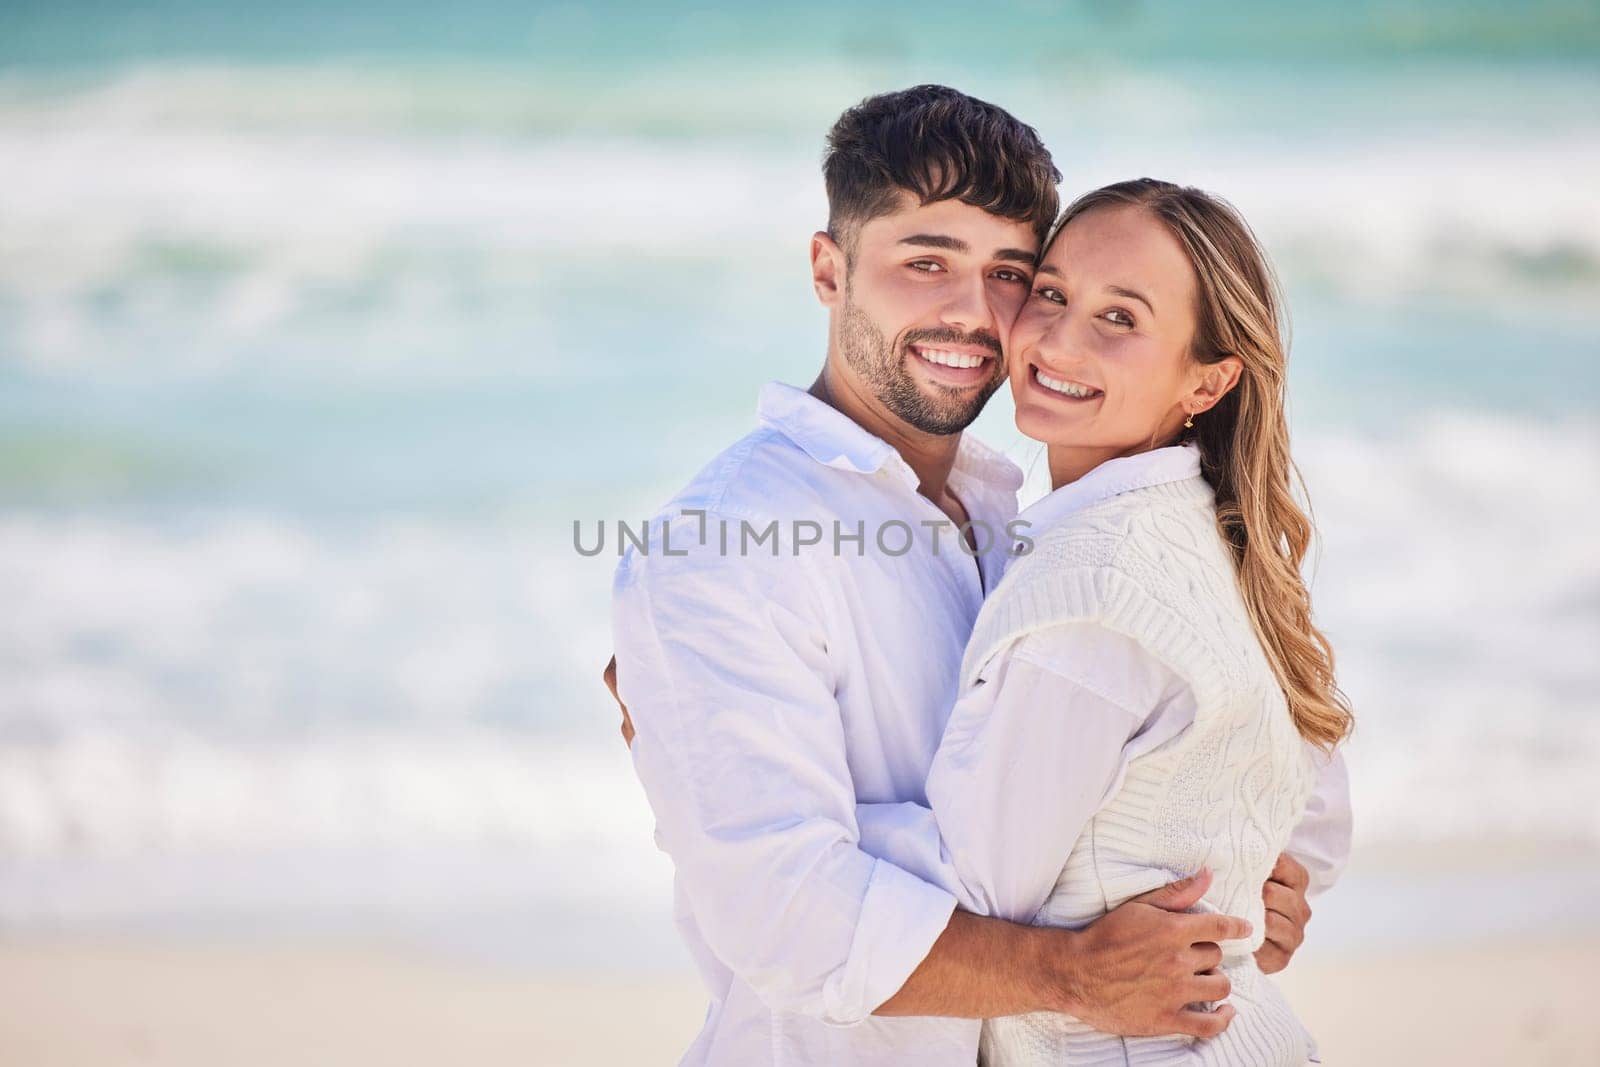 Portrait, love or couple hug at beach on holiday vacation or romantic honeymoon to celebrate marriage commitment. Travel, trust or woman bonding or hugging a happy partner in fun summer romance by YuriArcurs